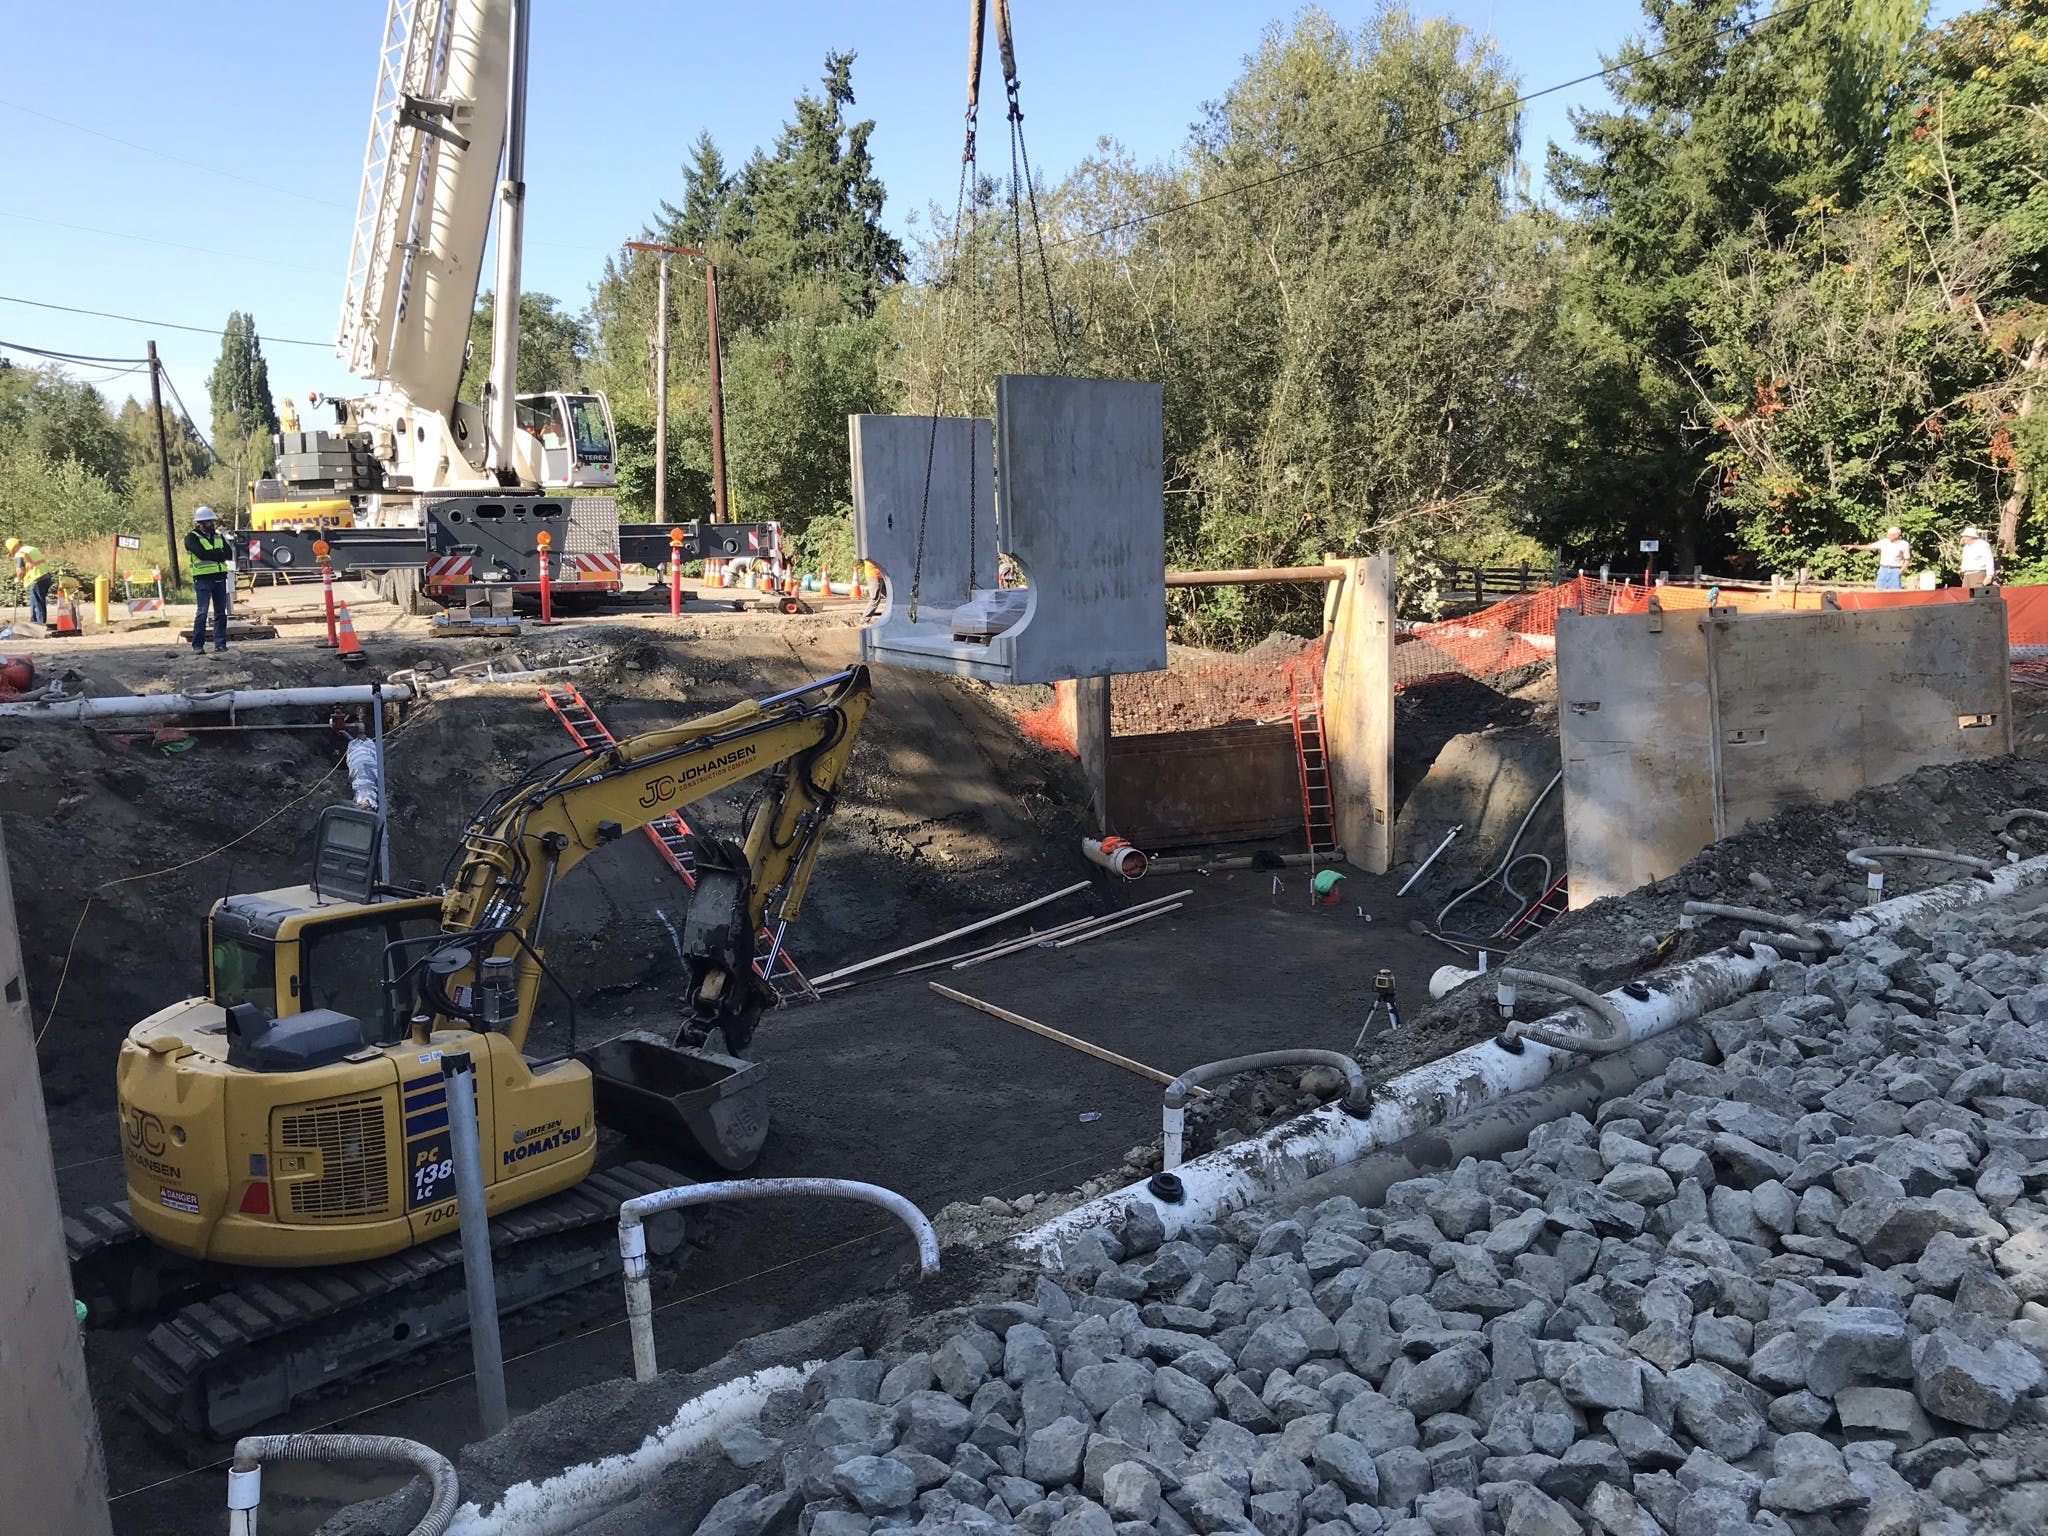 The first culvert base section being lowered into place for the Ebright Creek Fish Passage project.